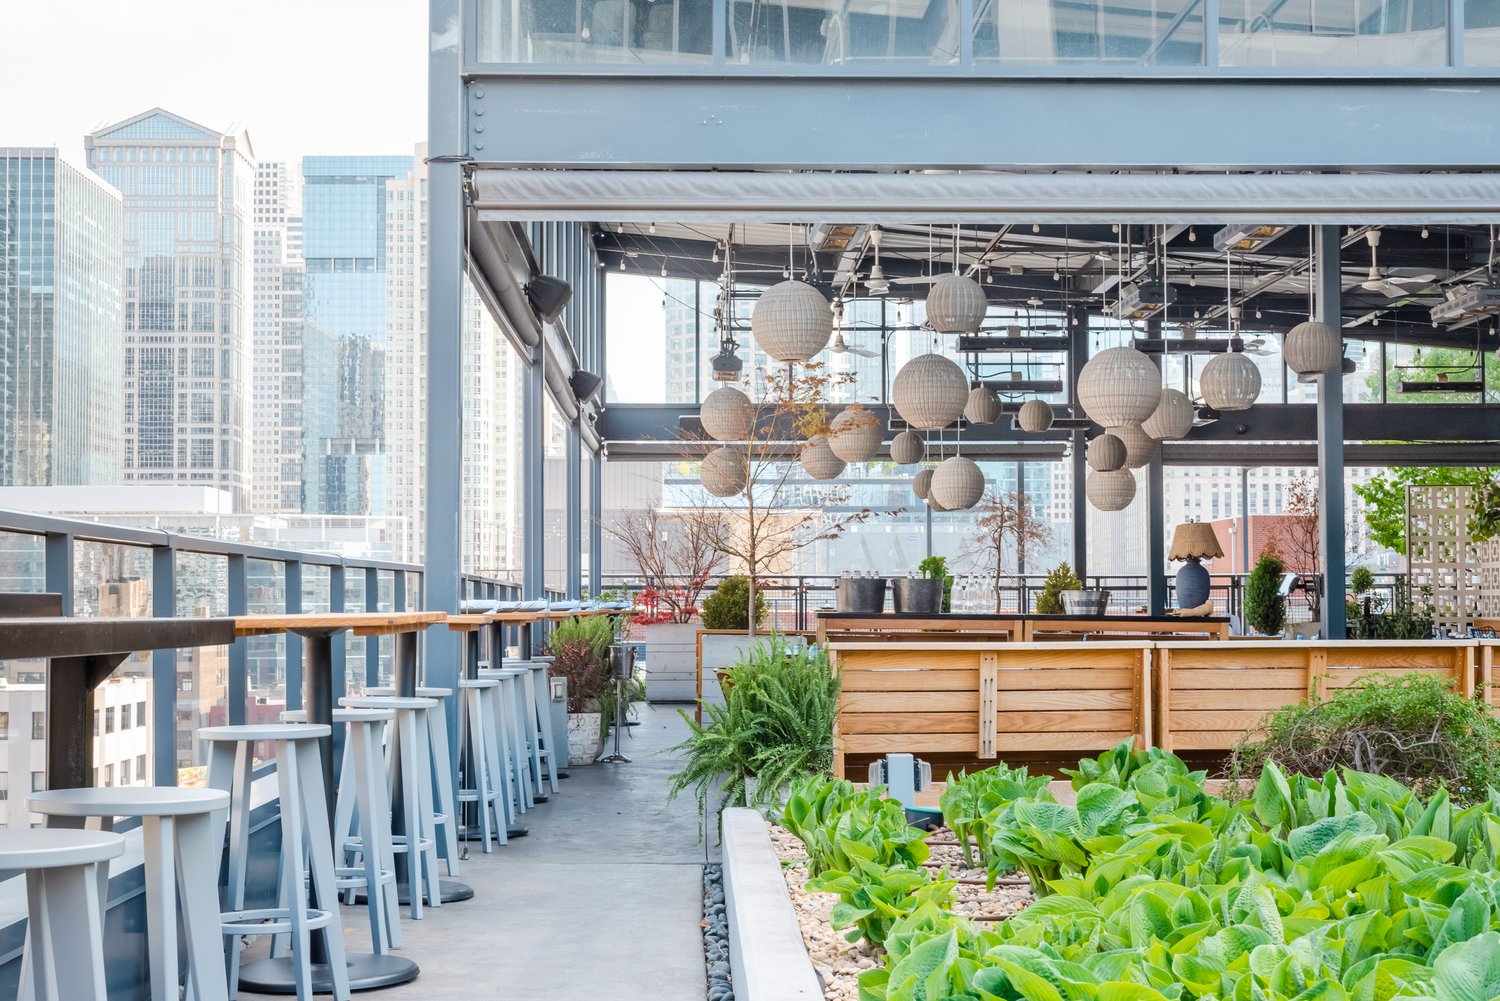 Take a look at Avec's new rooftop bar